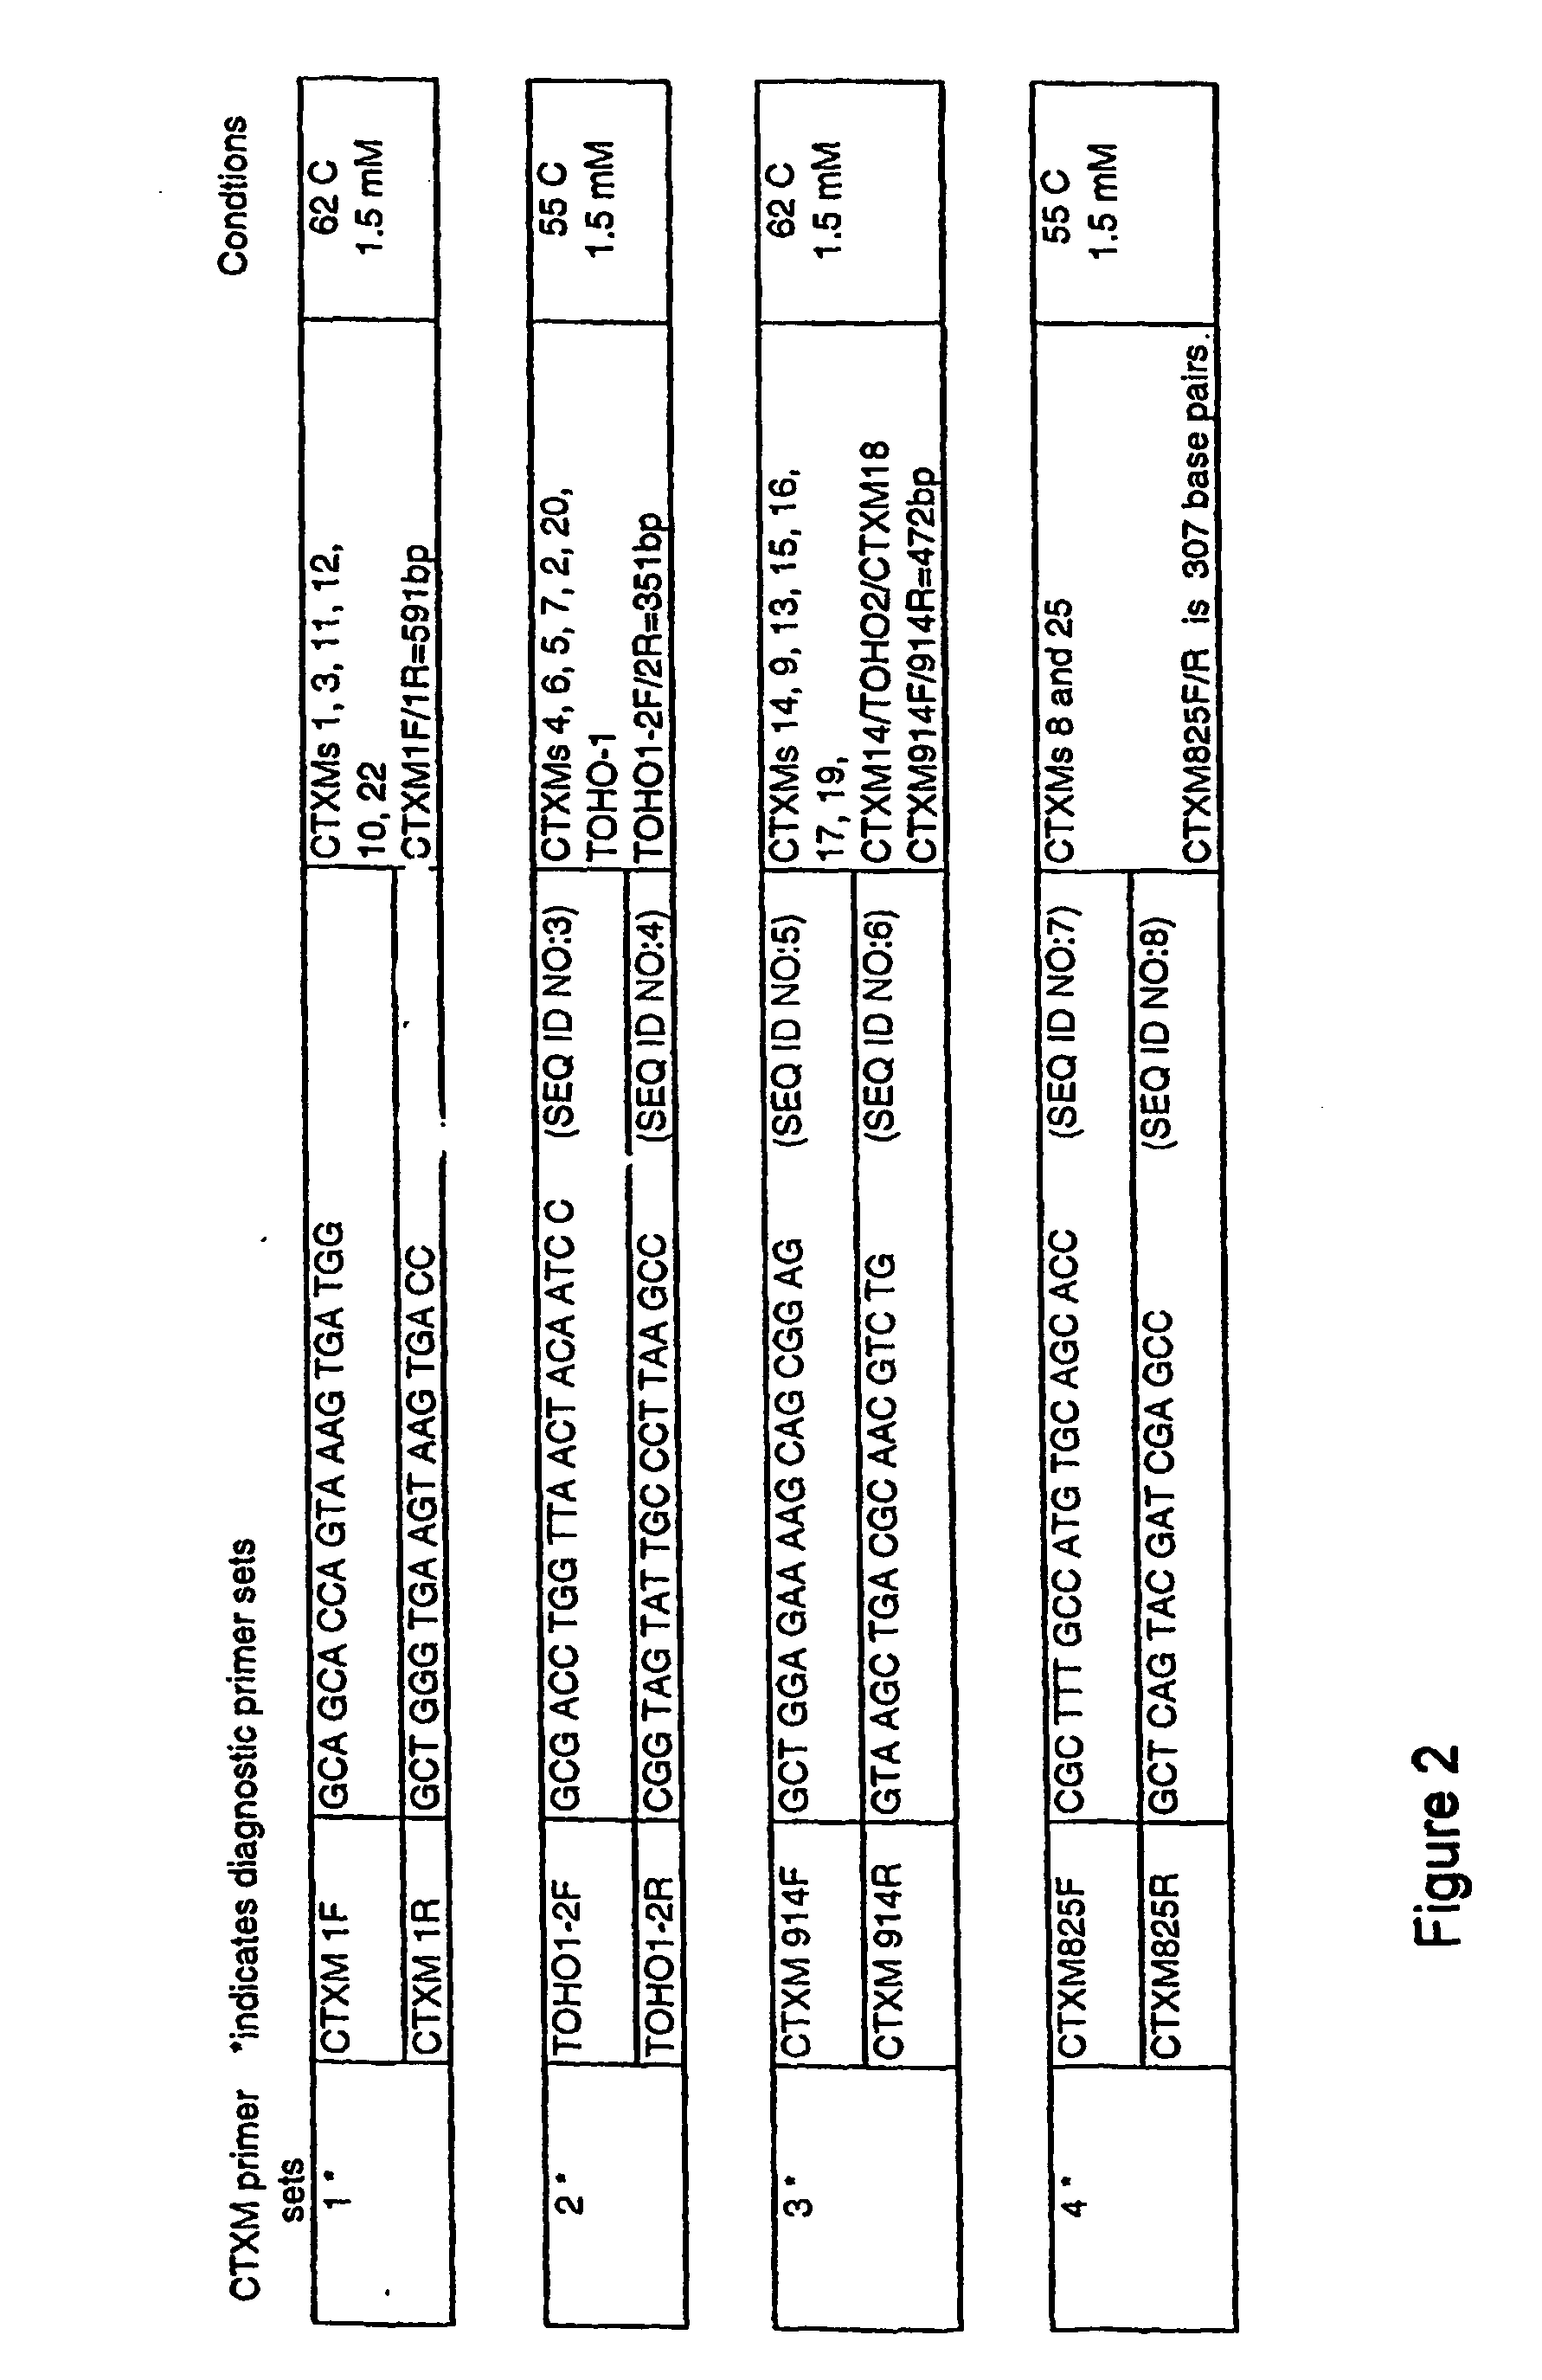 Primers for Use in Detecting Beta-Lactamases